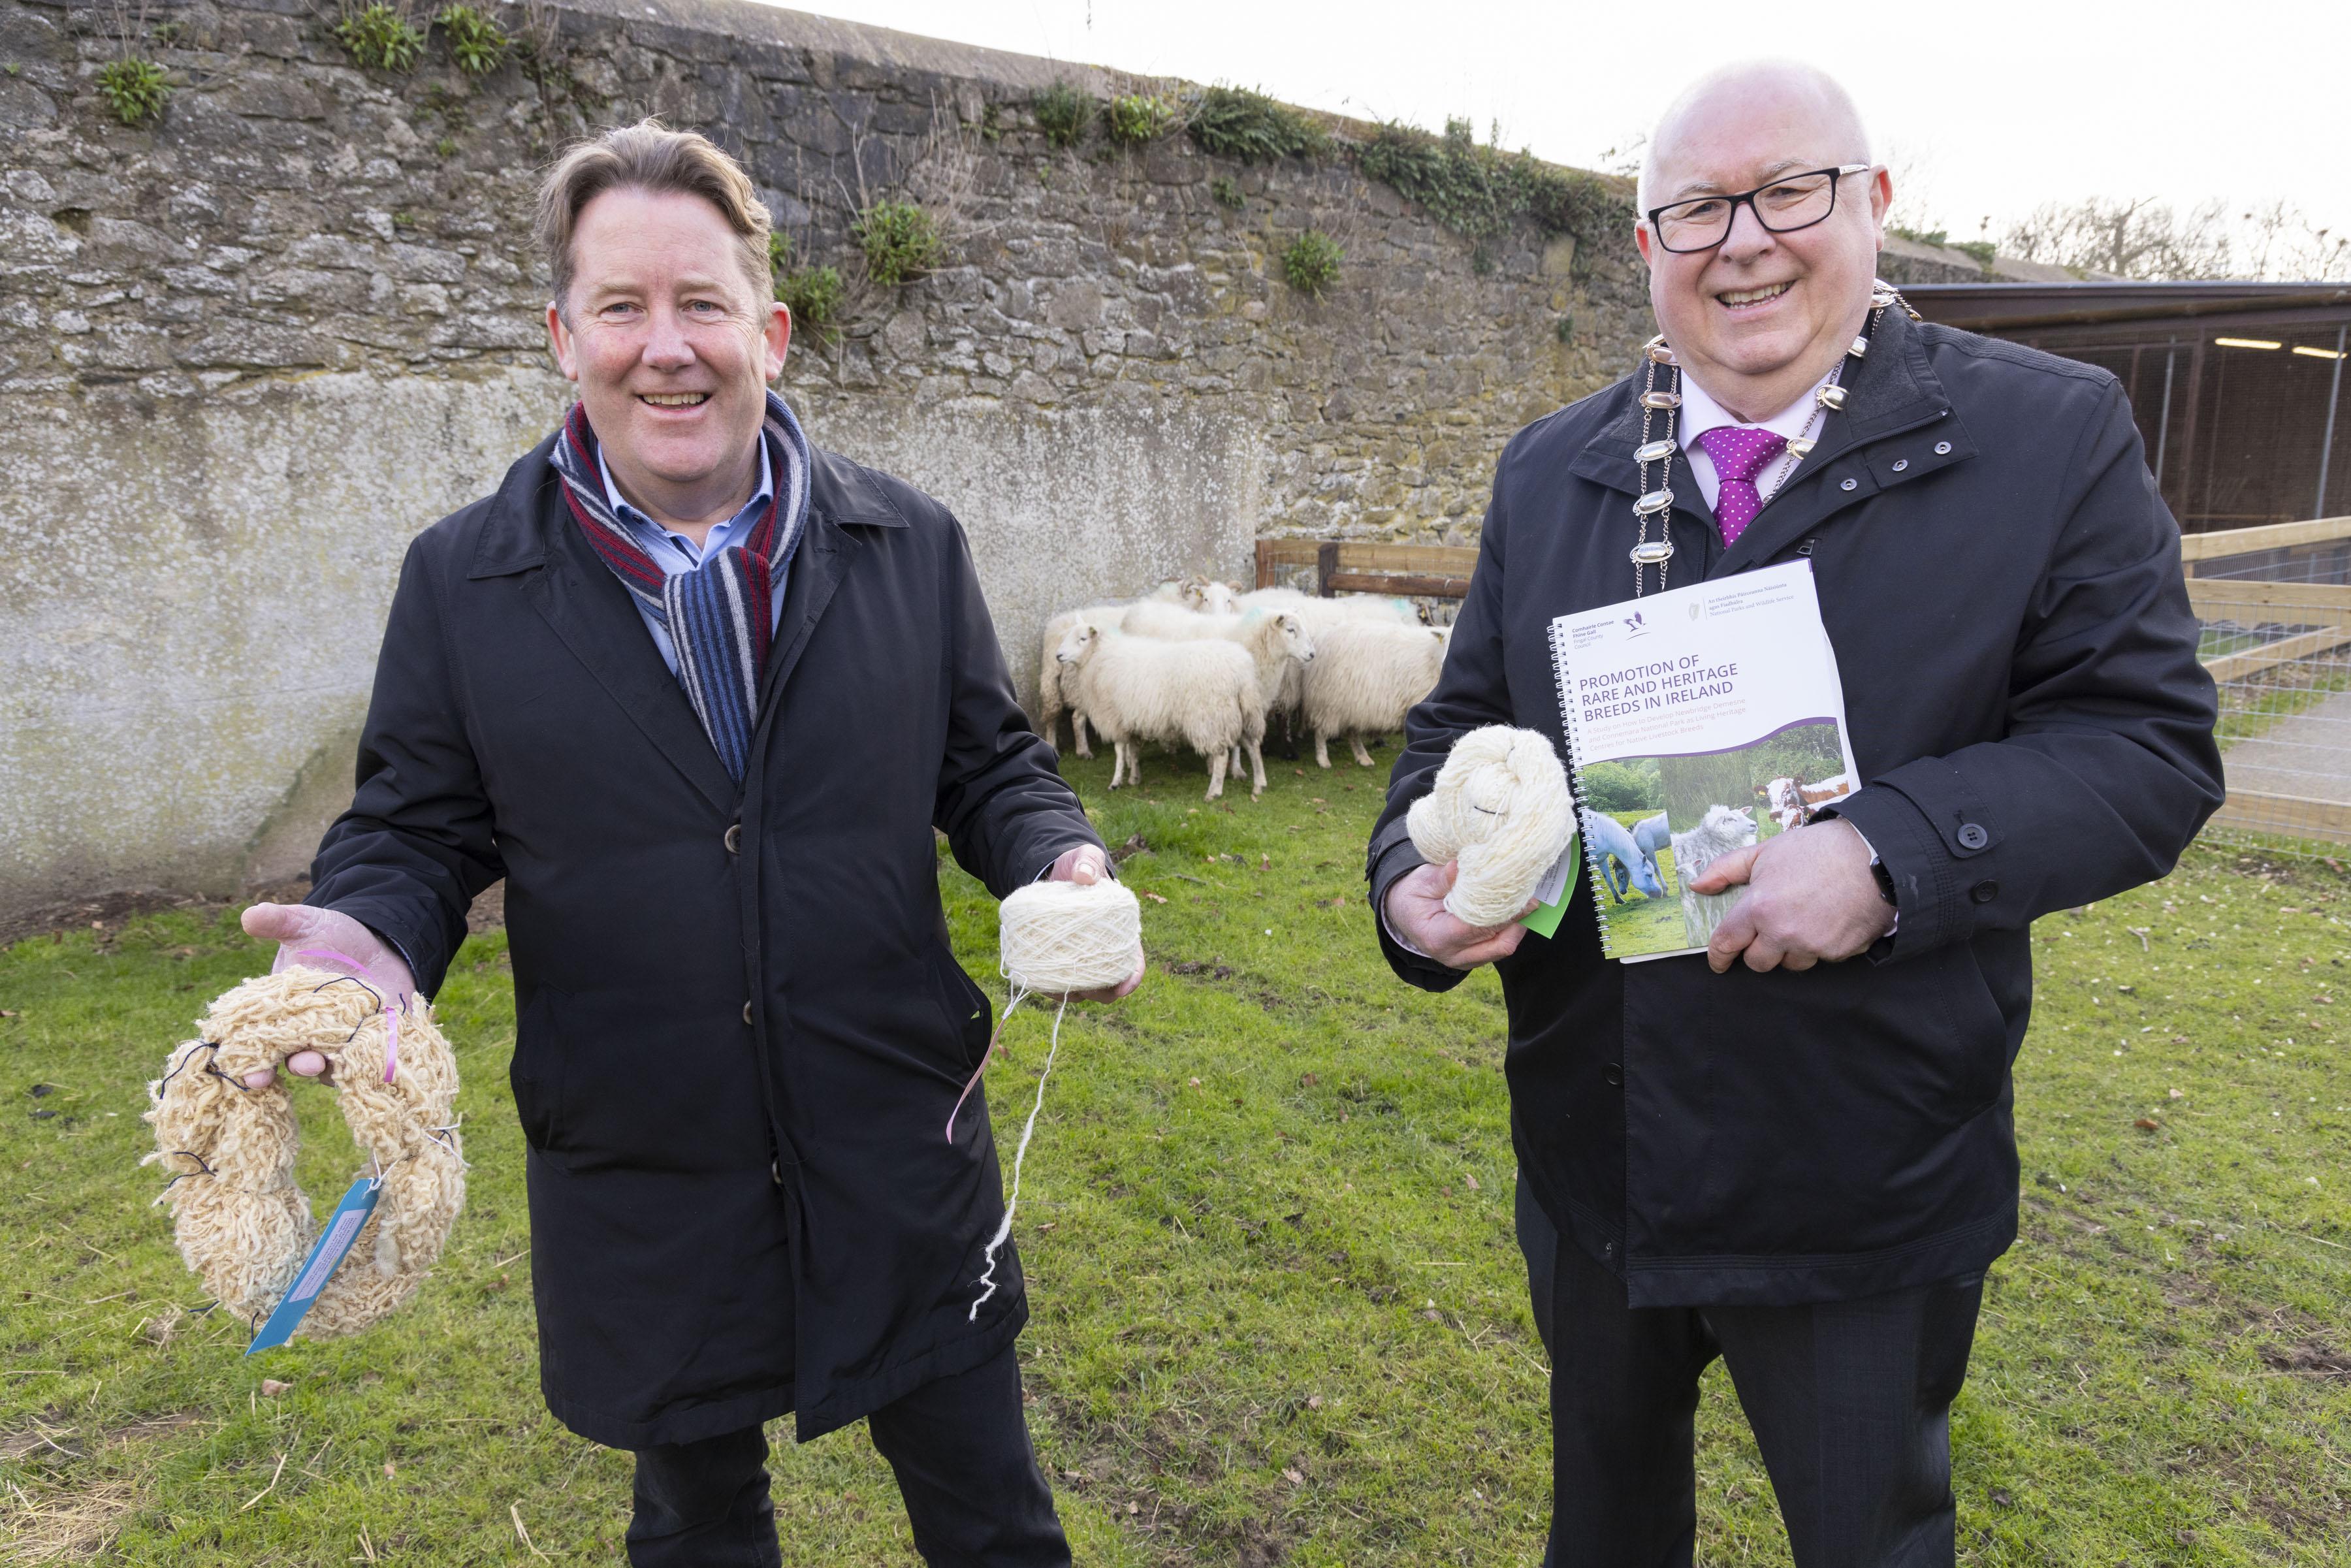 Minister O’Brien commended the work that is being done in relation to heritage breeds and, presenting a gift of Cladoir Sheep from Connemara National Park to Newbridge Farm